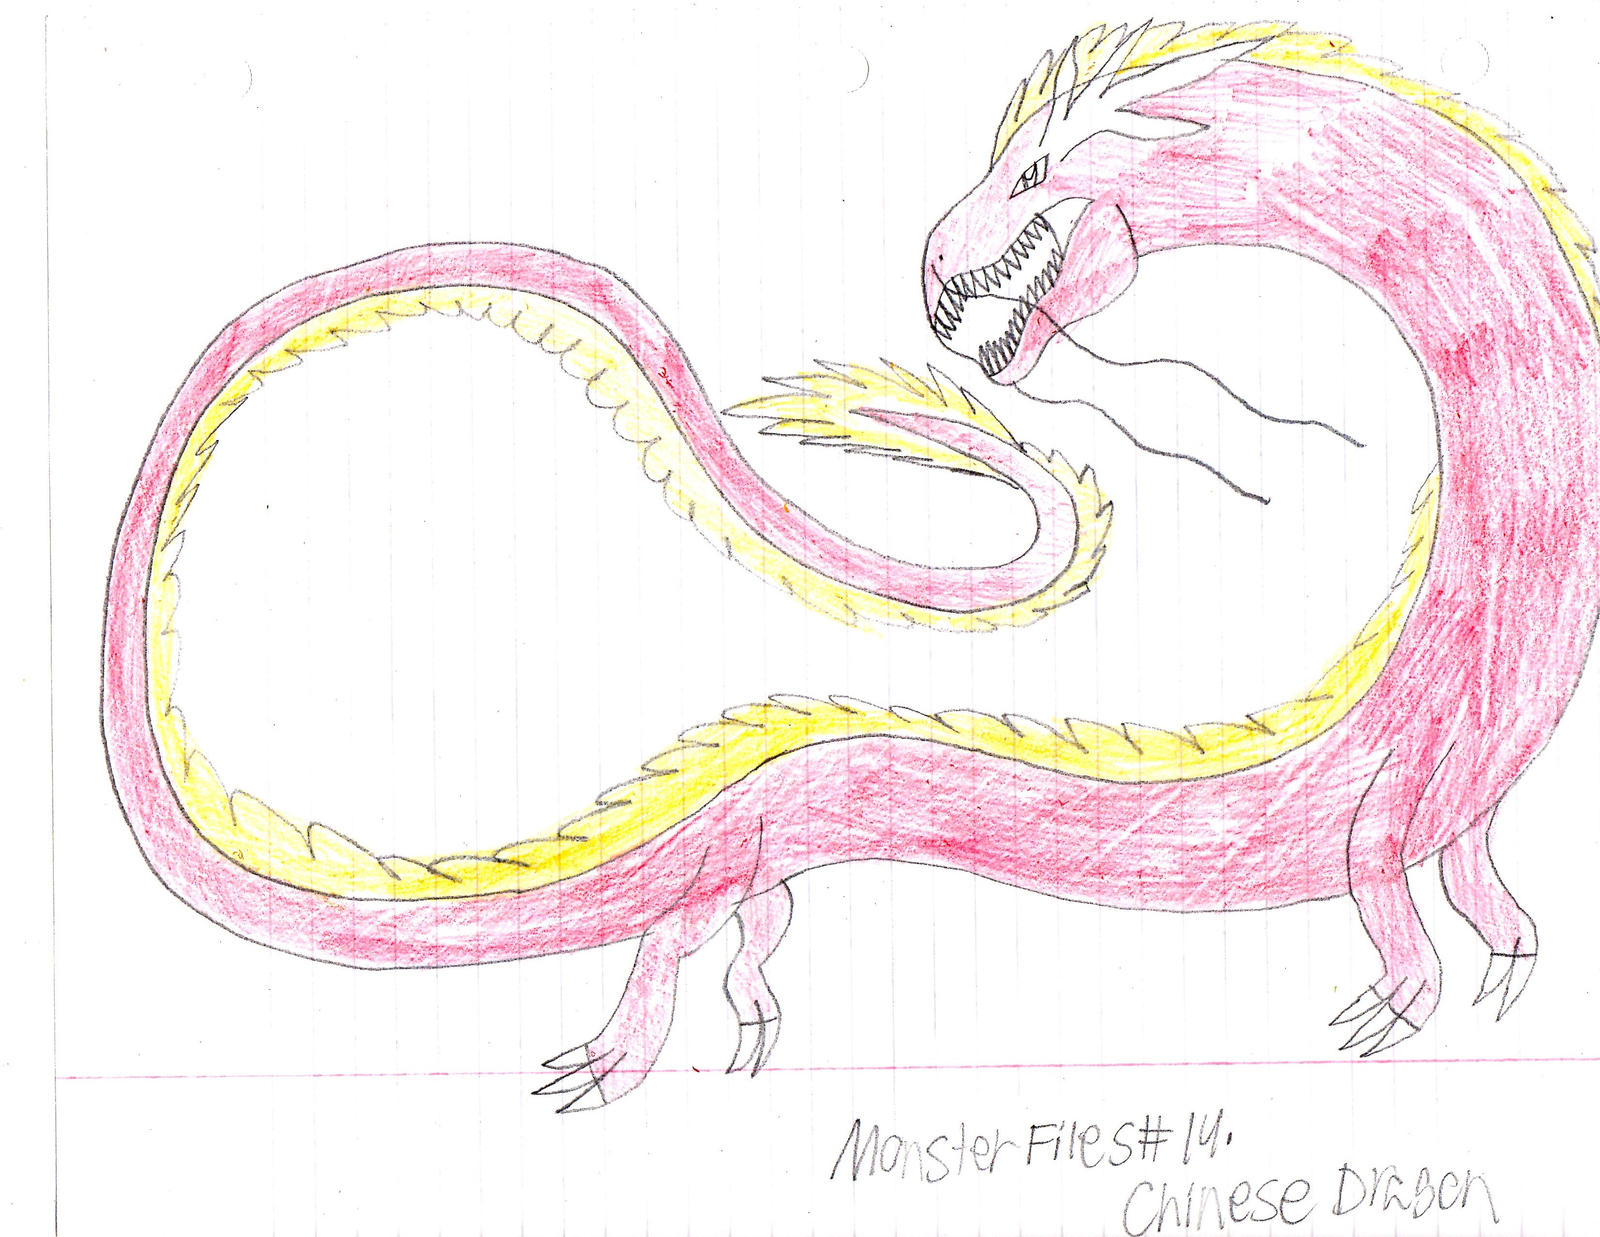 Monster Files #14. Chinese Dragon